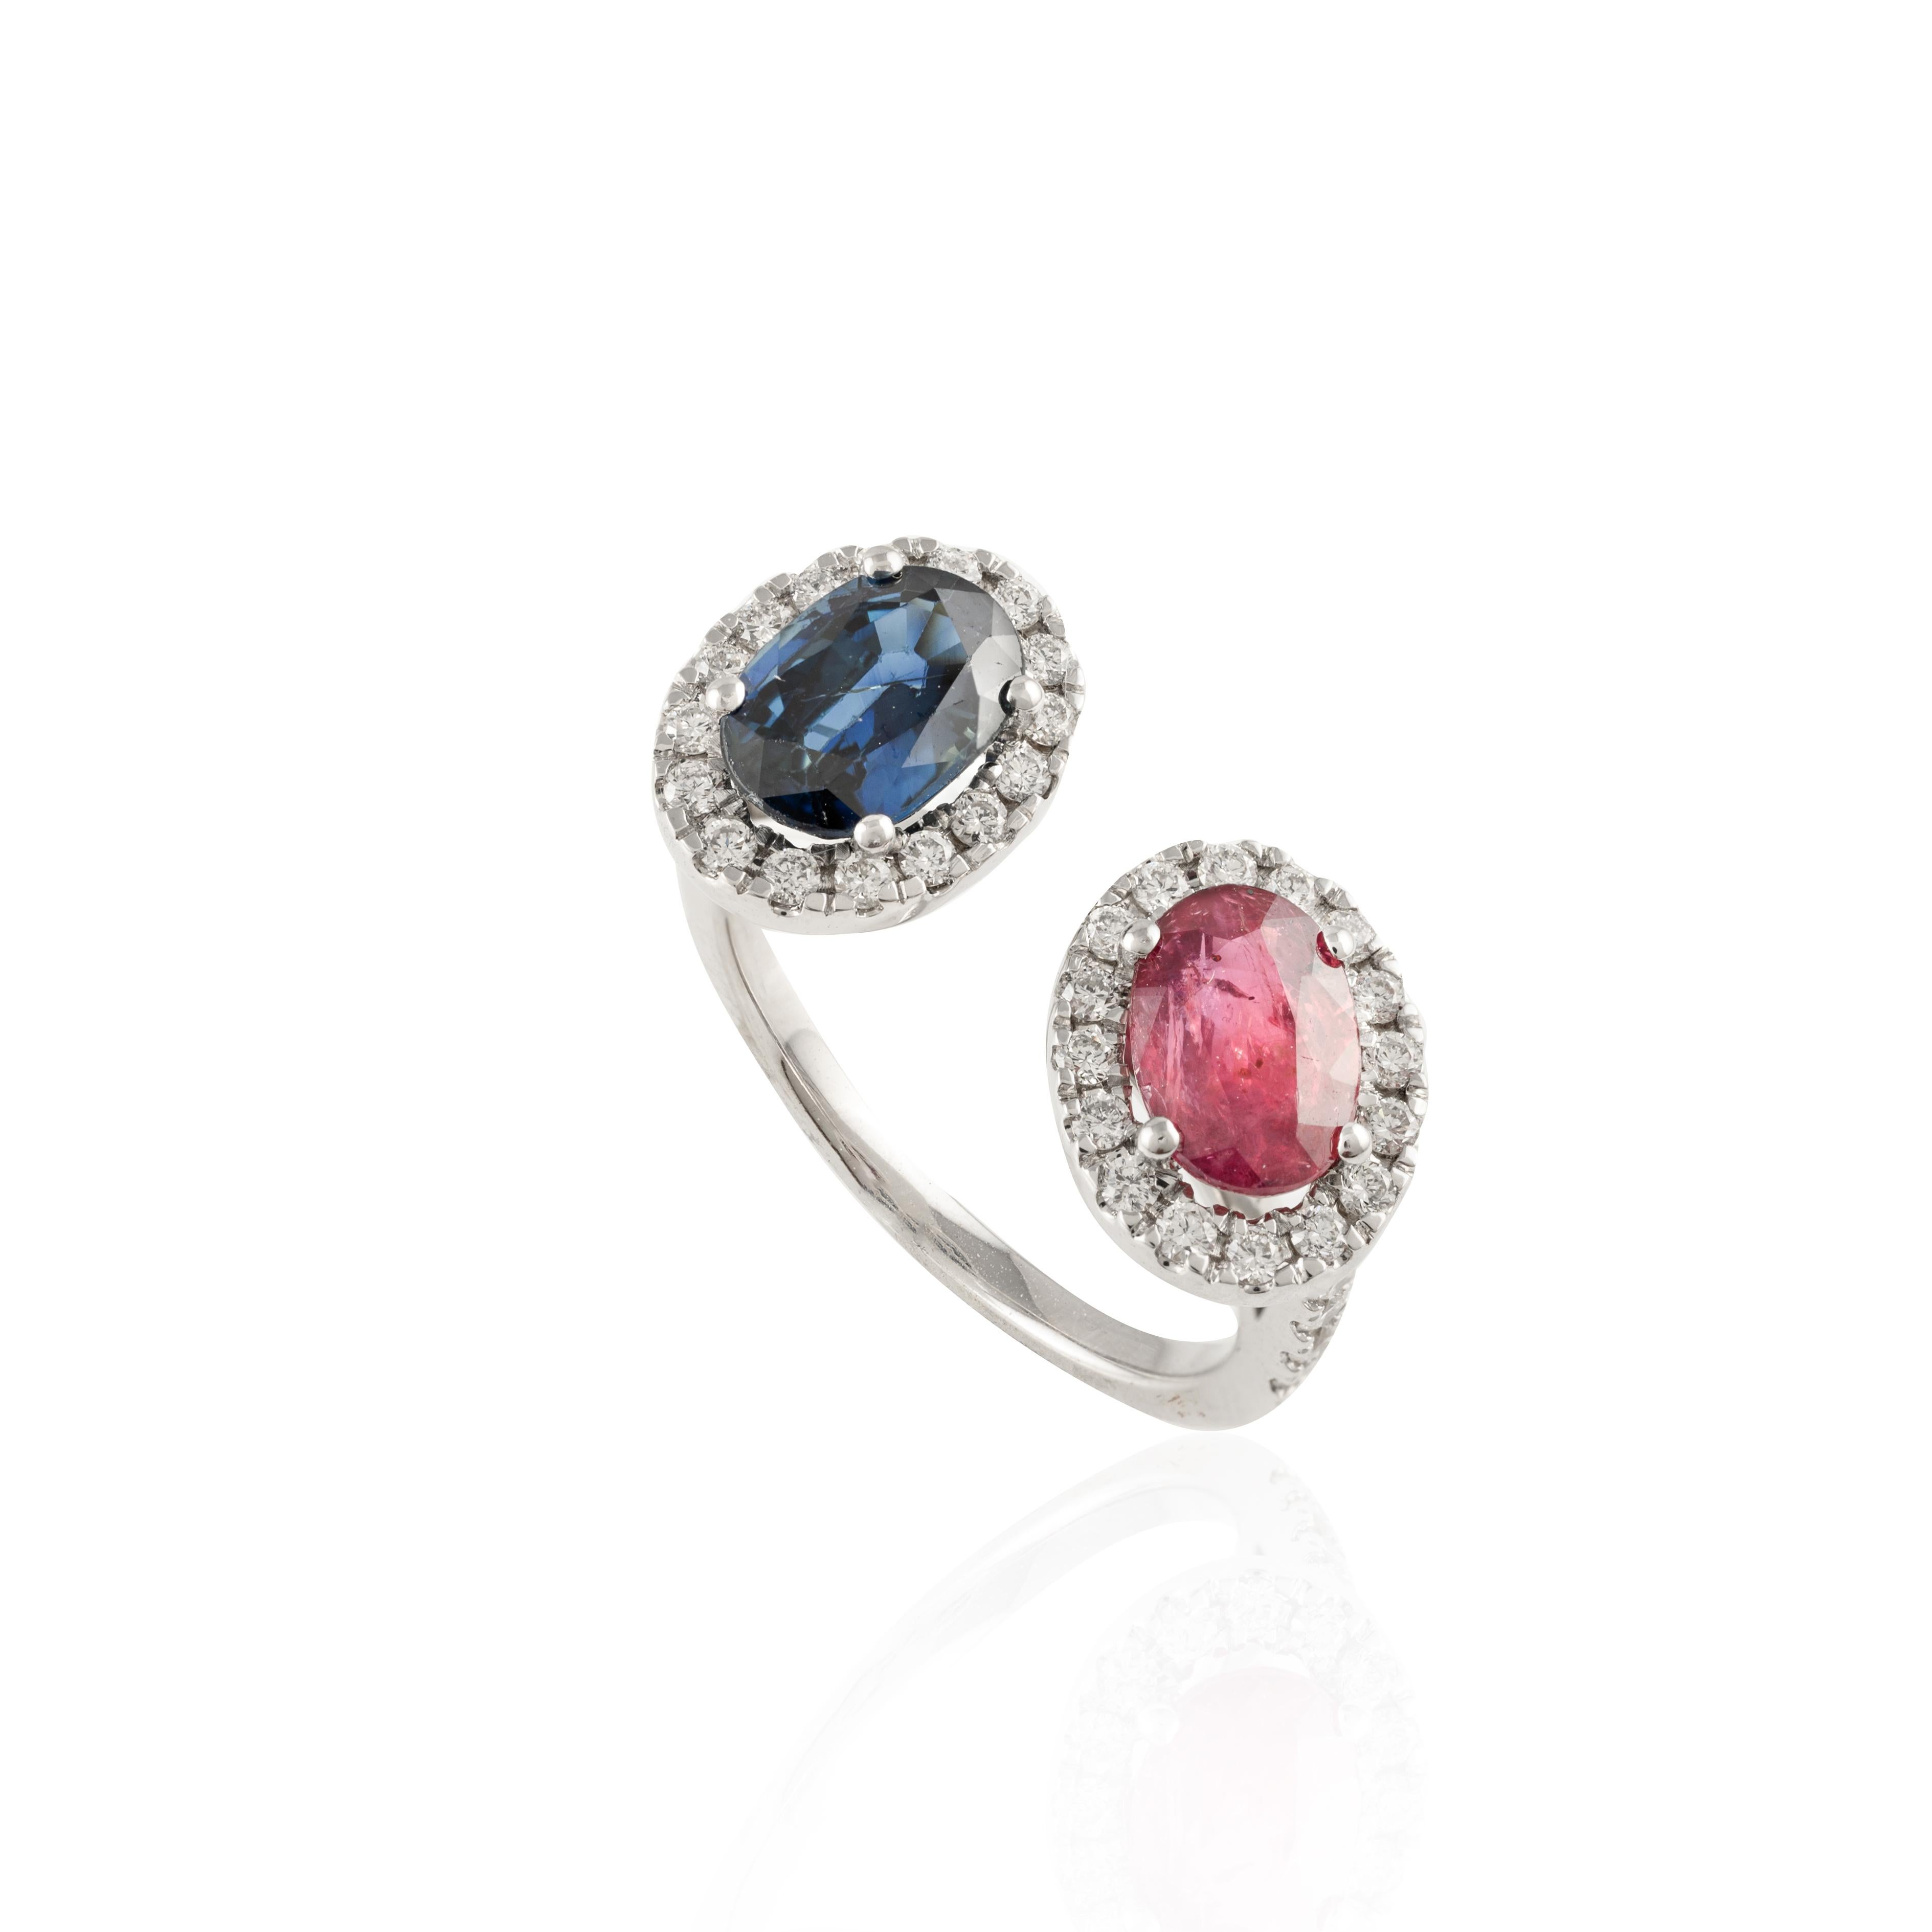 For Sale:  Certified Diamond, Ruby and Blue Sapphire Toi et Moi Ring 18k Solid White Gold 7